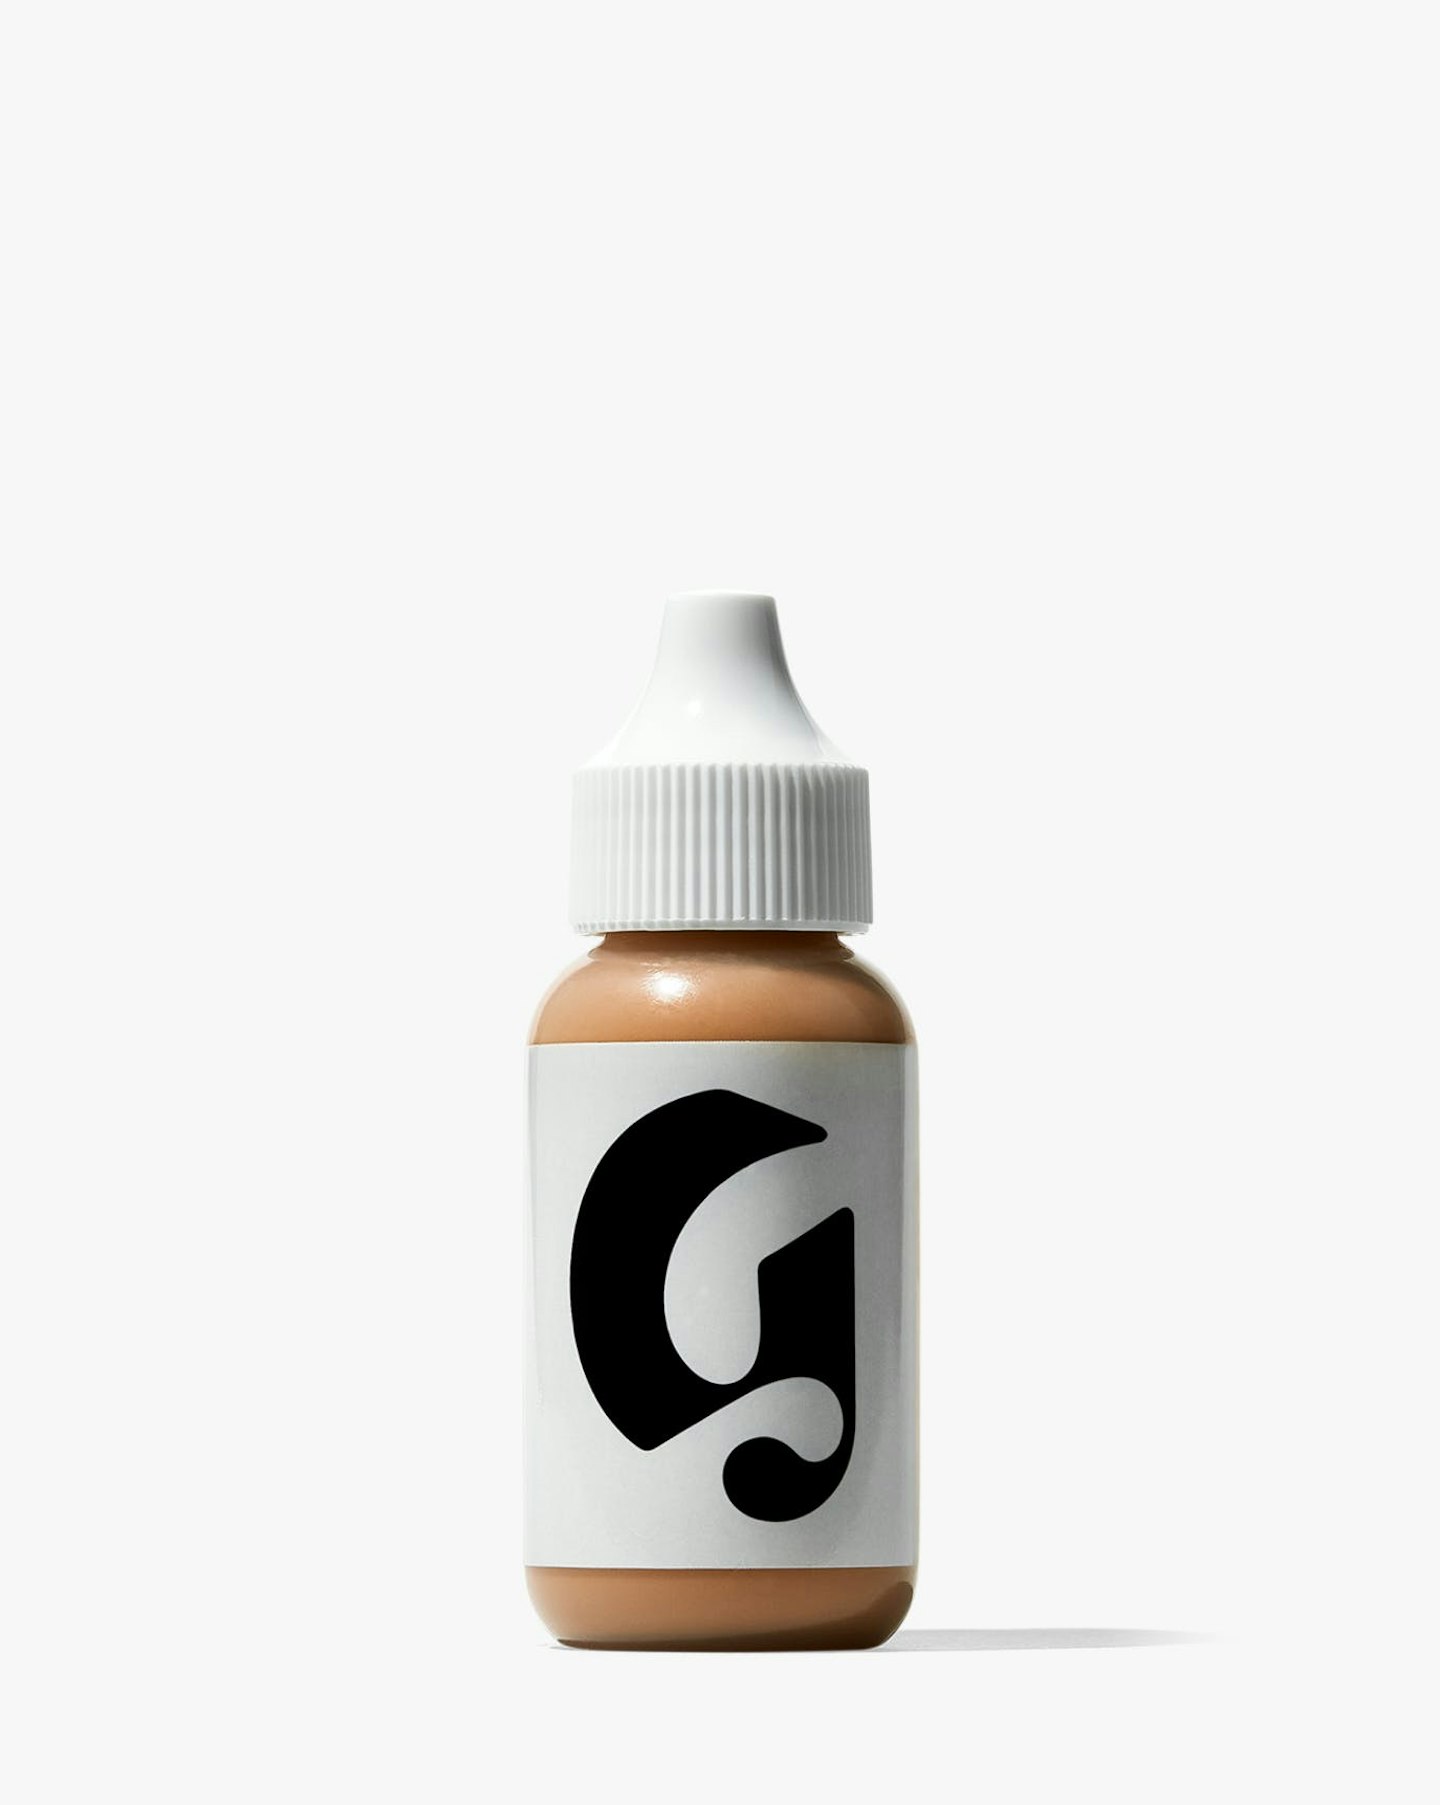 Glossier, Perfecting Skin Tint